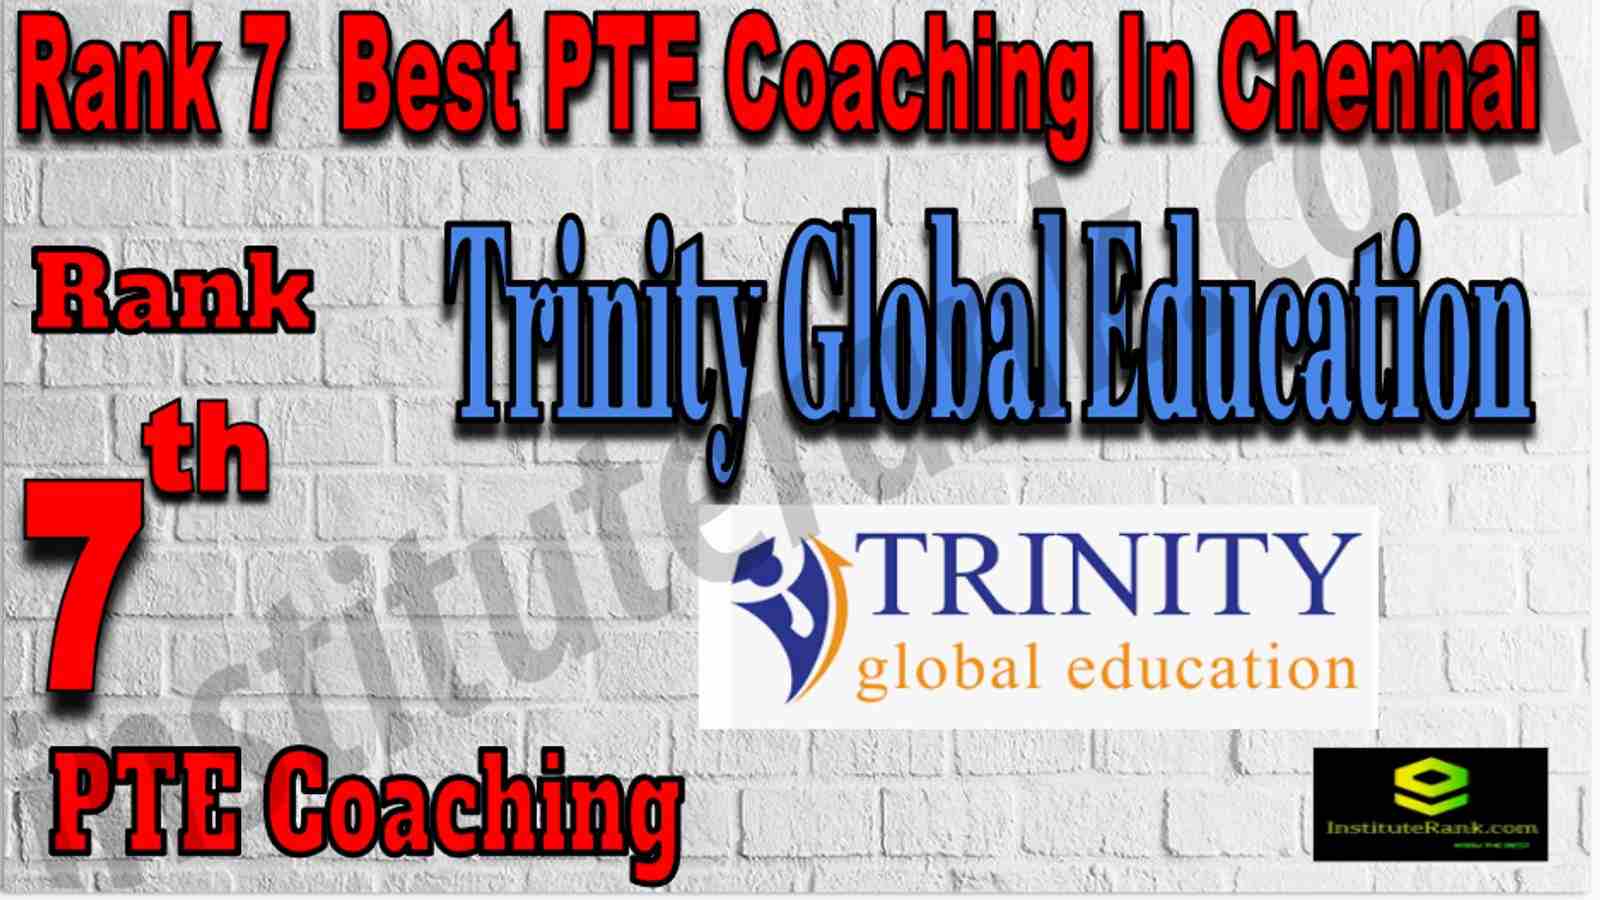 7th Best PTE Coaching In Chennai